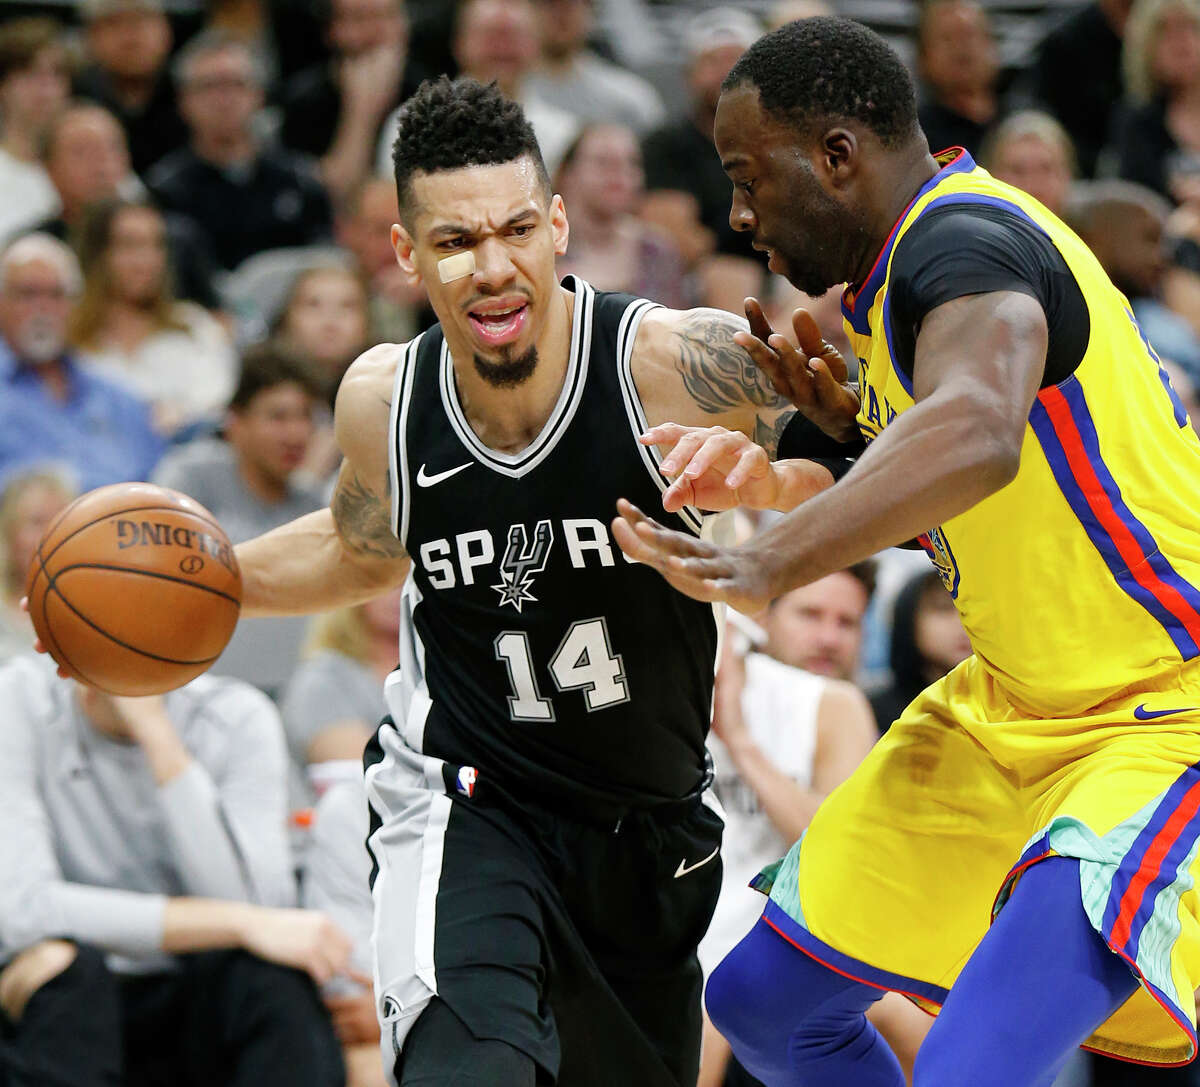 San Antonio Spurs' Danny Green looks for room around Golden State Warriors' Draymond Green during first half action Monday March 19, 2018 at the AT&T Center.